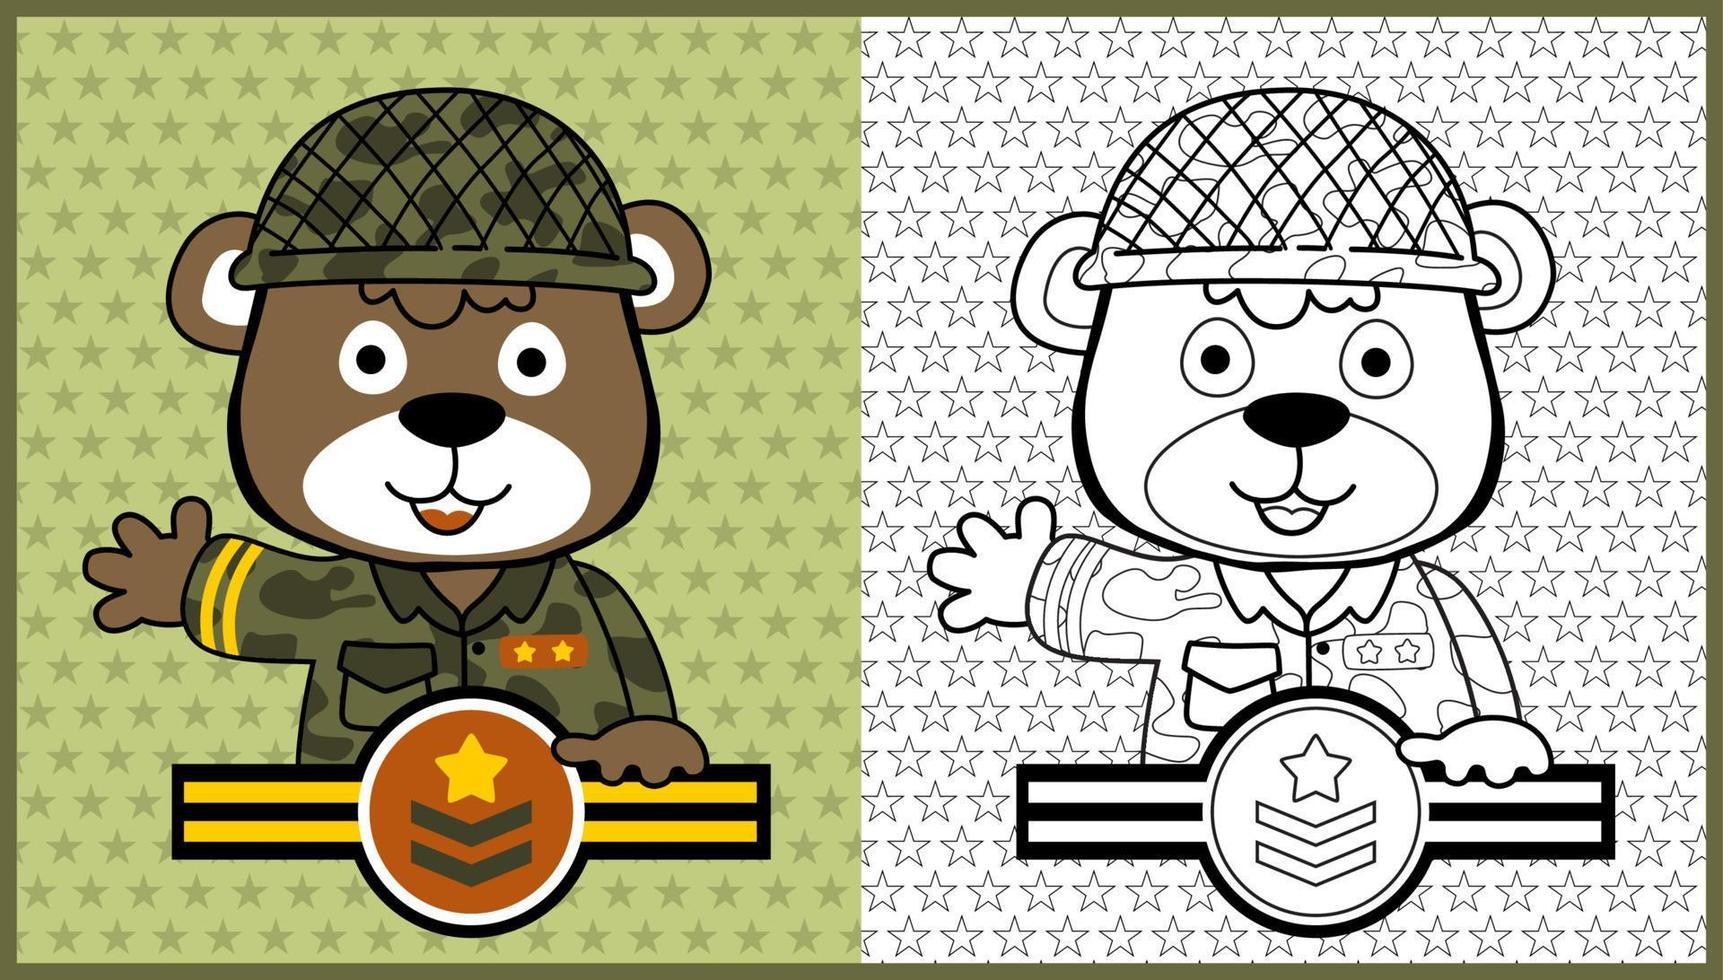 vector cartoon of funny bear soldier on star background pattern, coloring page or book